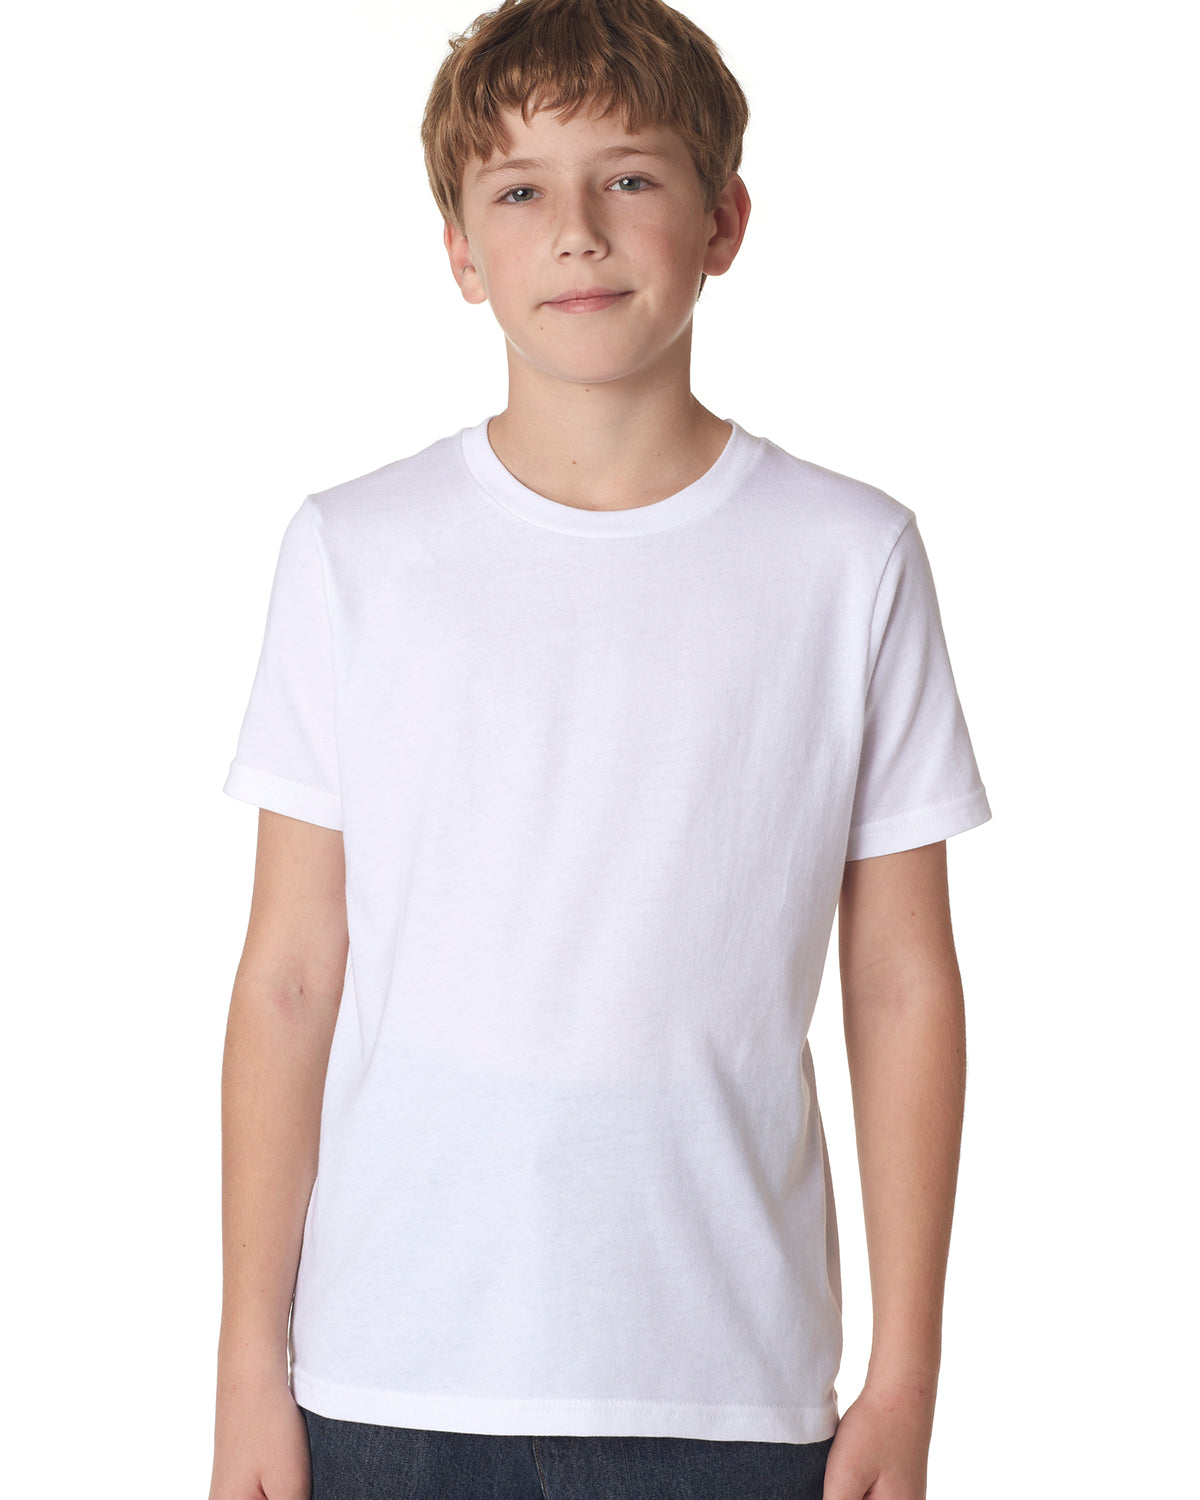 child model wearing next level youth tee in white